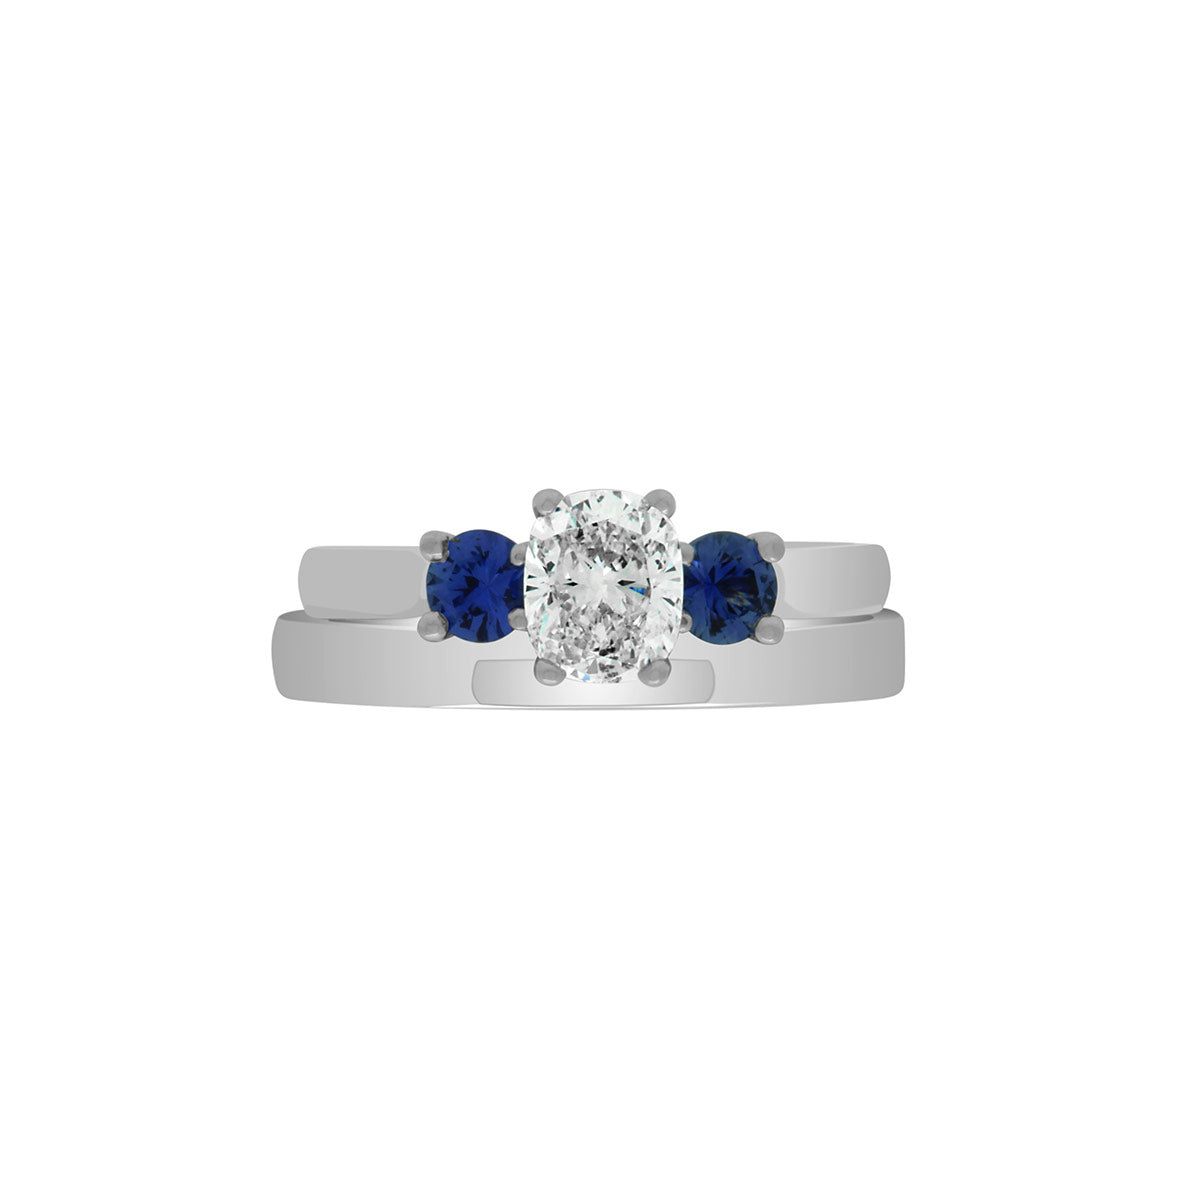 Diamond Sapphire Trilogy set in white gold metal with a matching white gold plain wedding ring